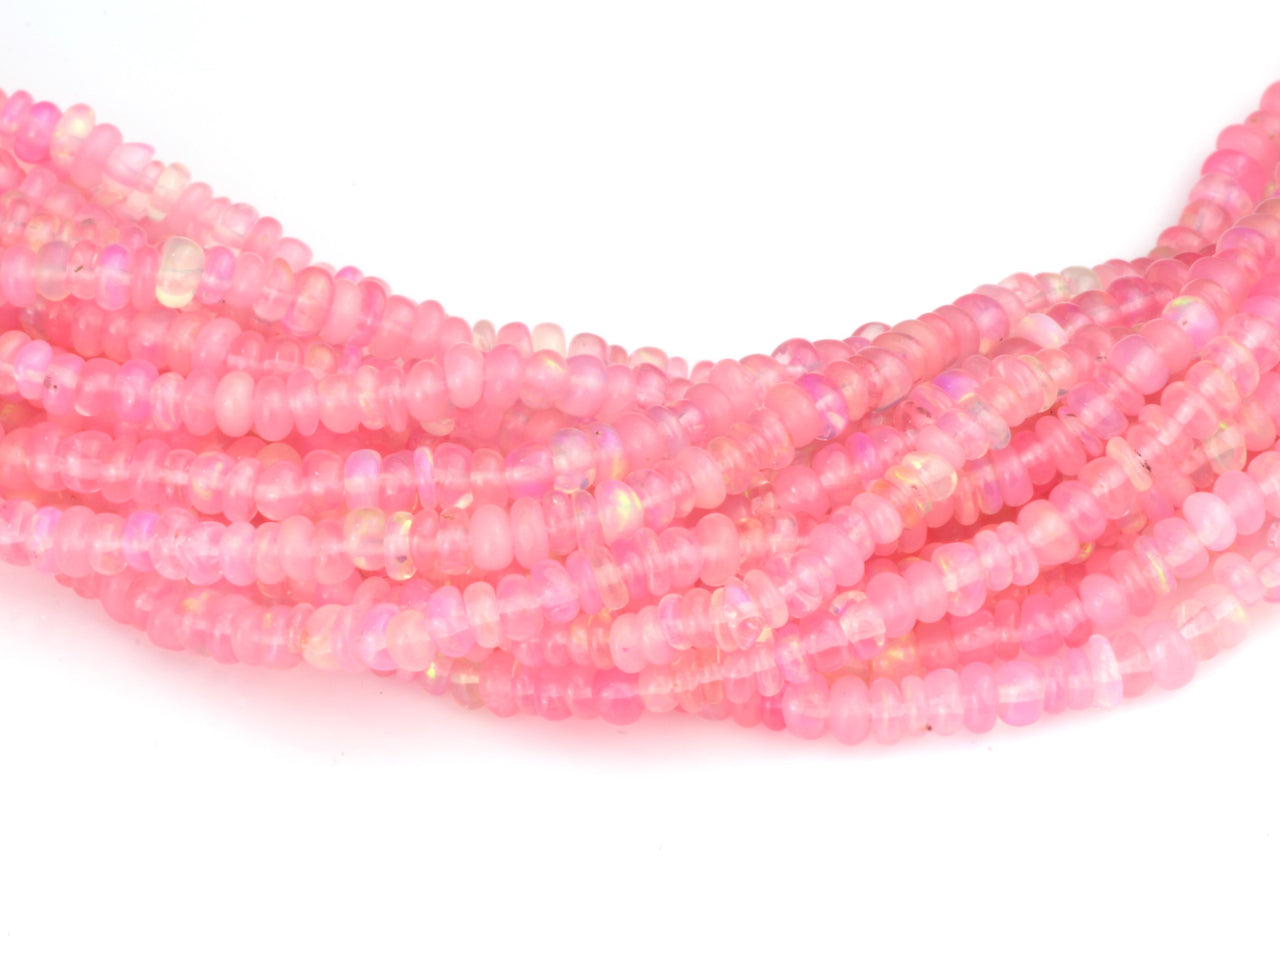 Pink Ethiopian Opal 2.5mm Smooth Rondelles Bead Strand